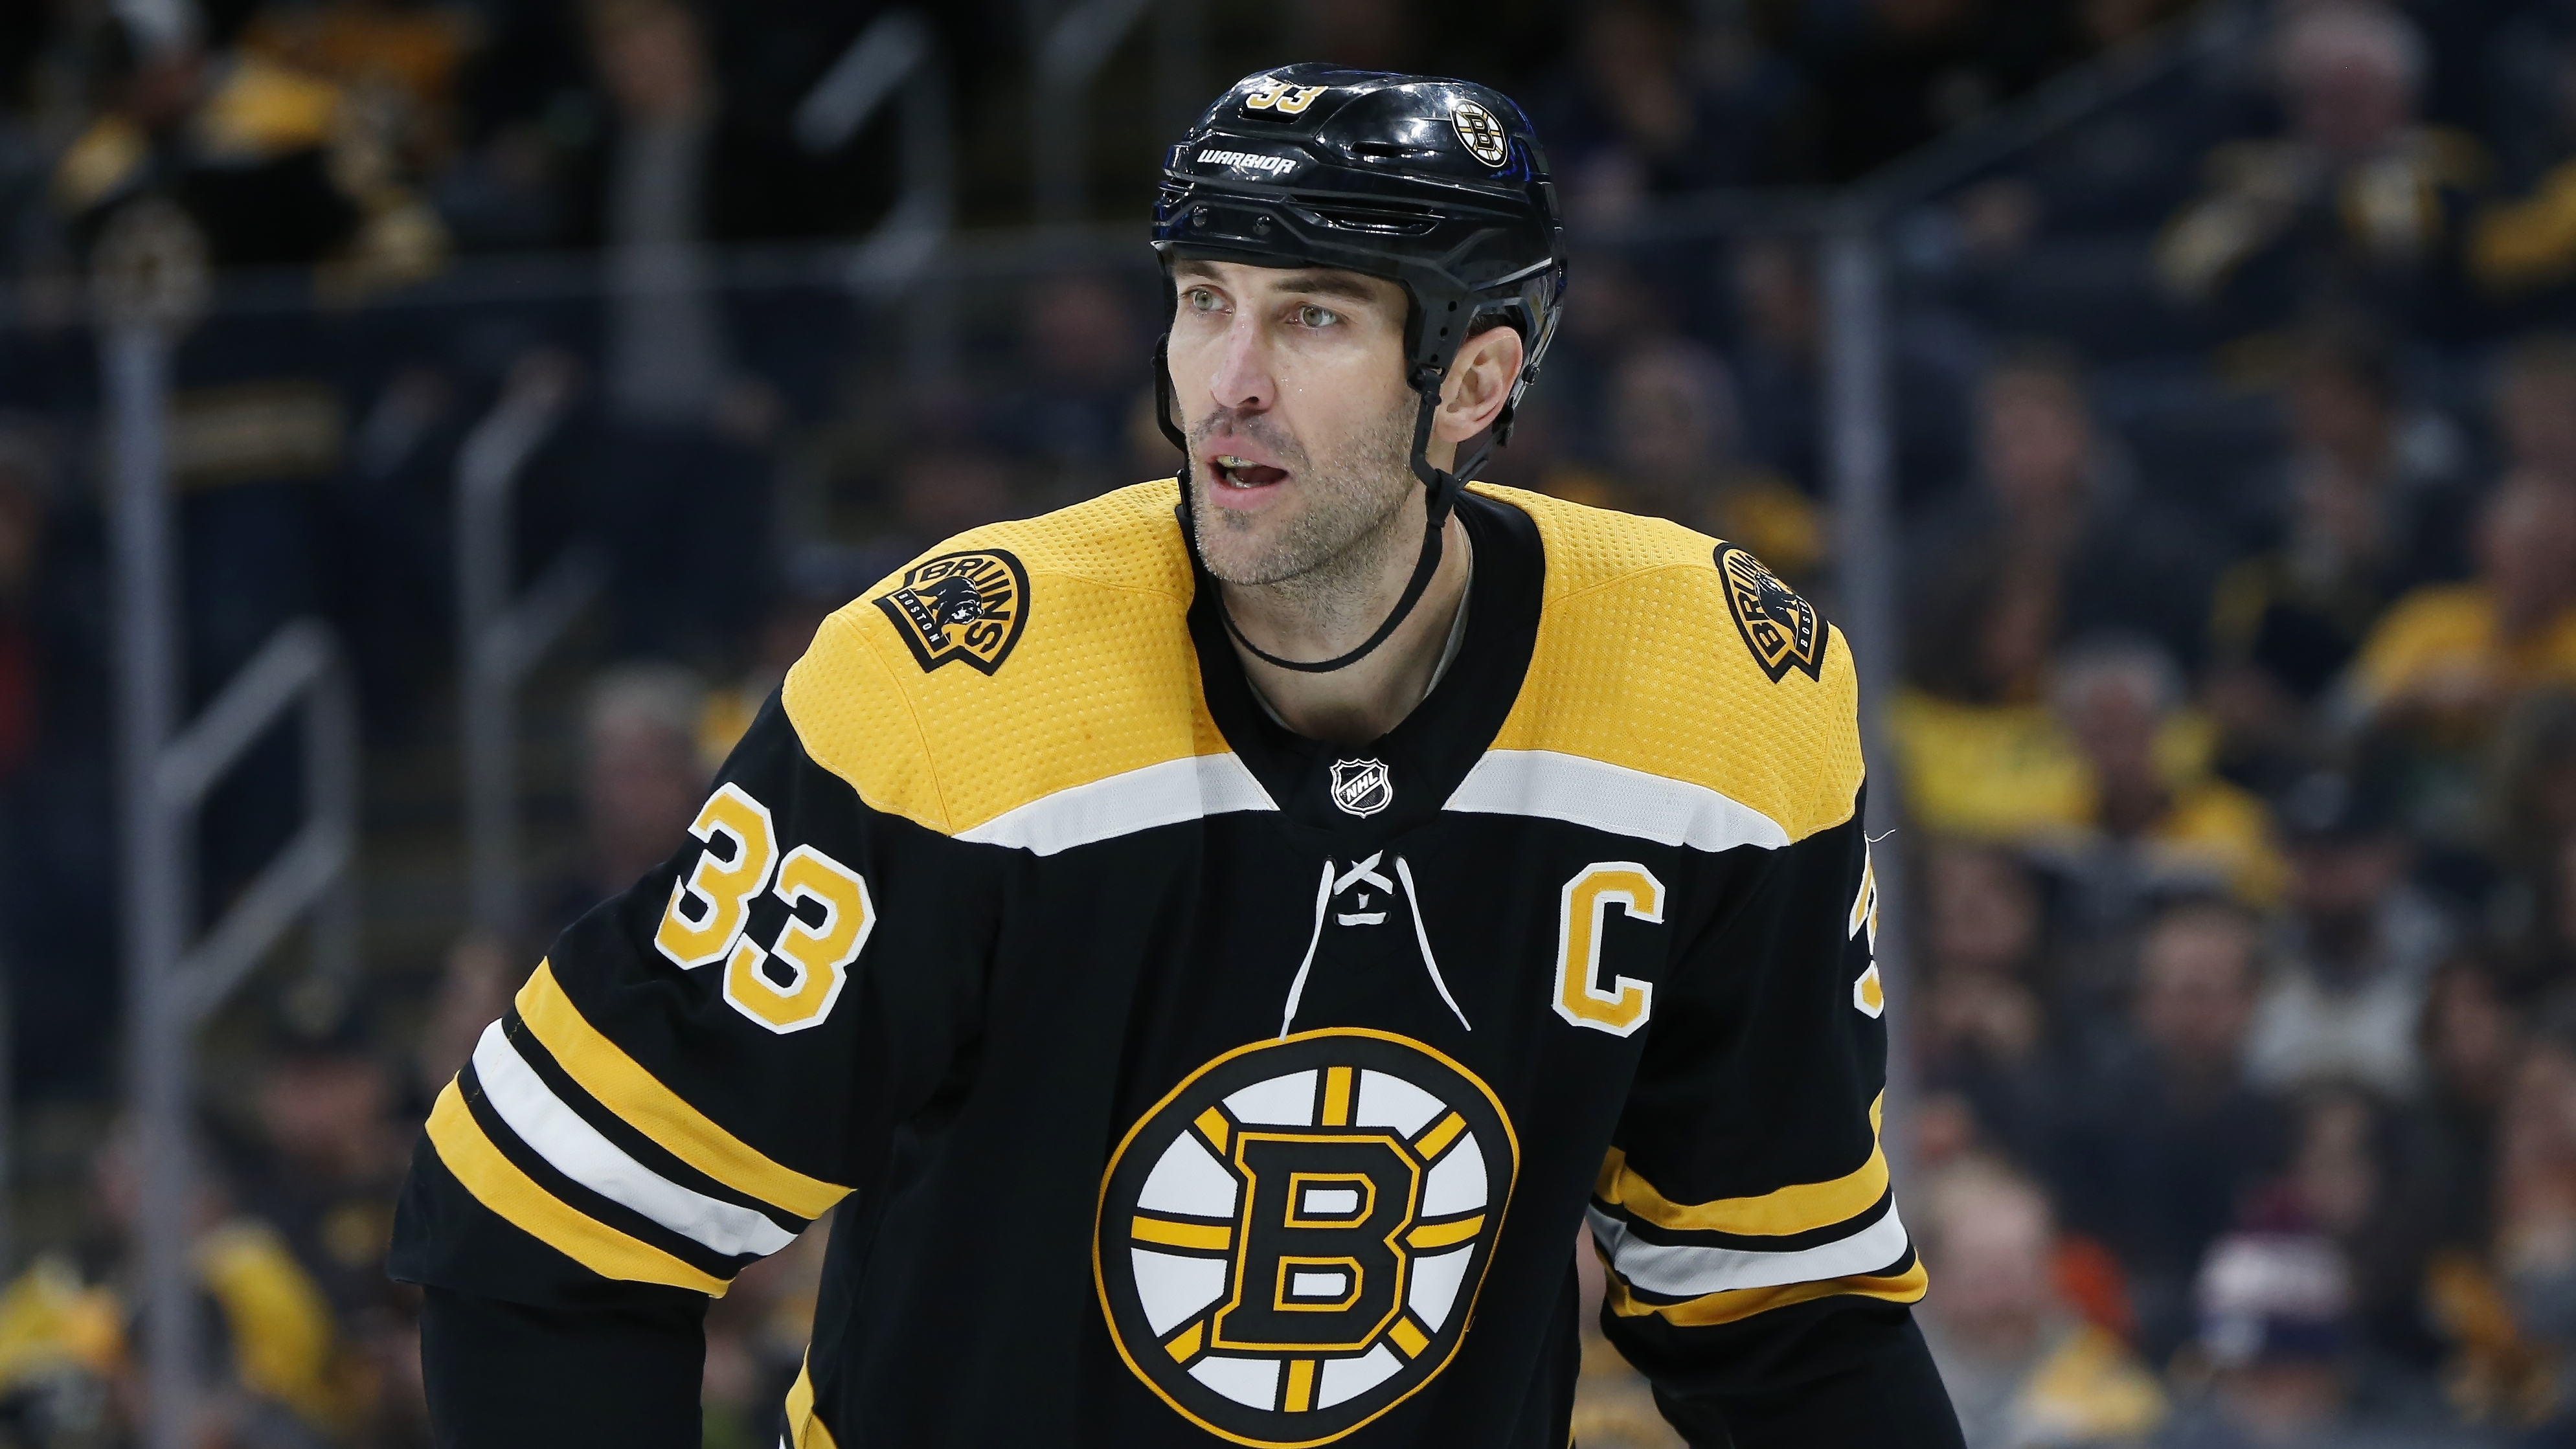 Islander's Zdeno Chara honored in possible final game